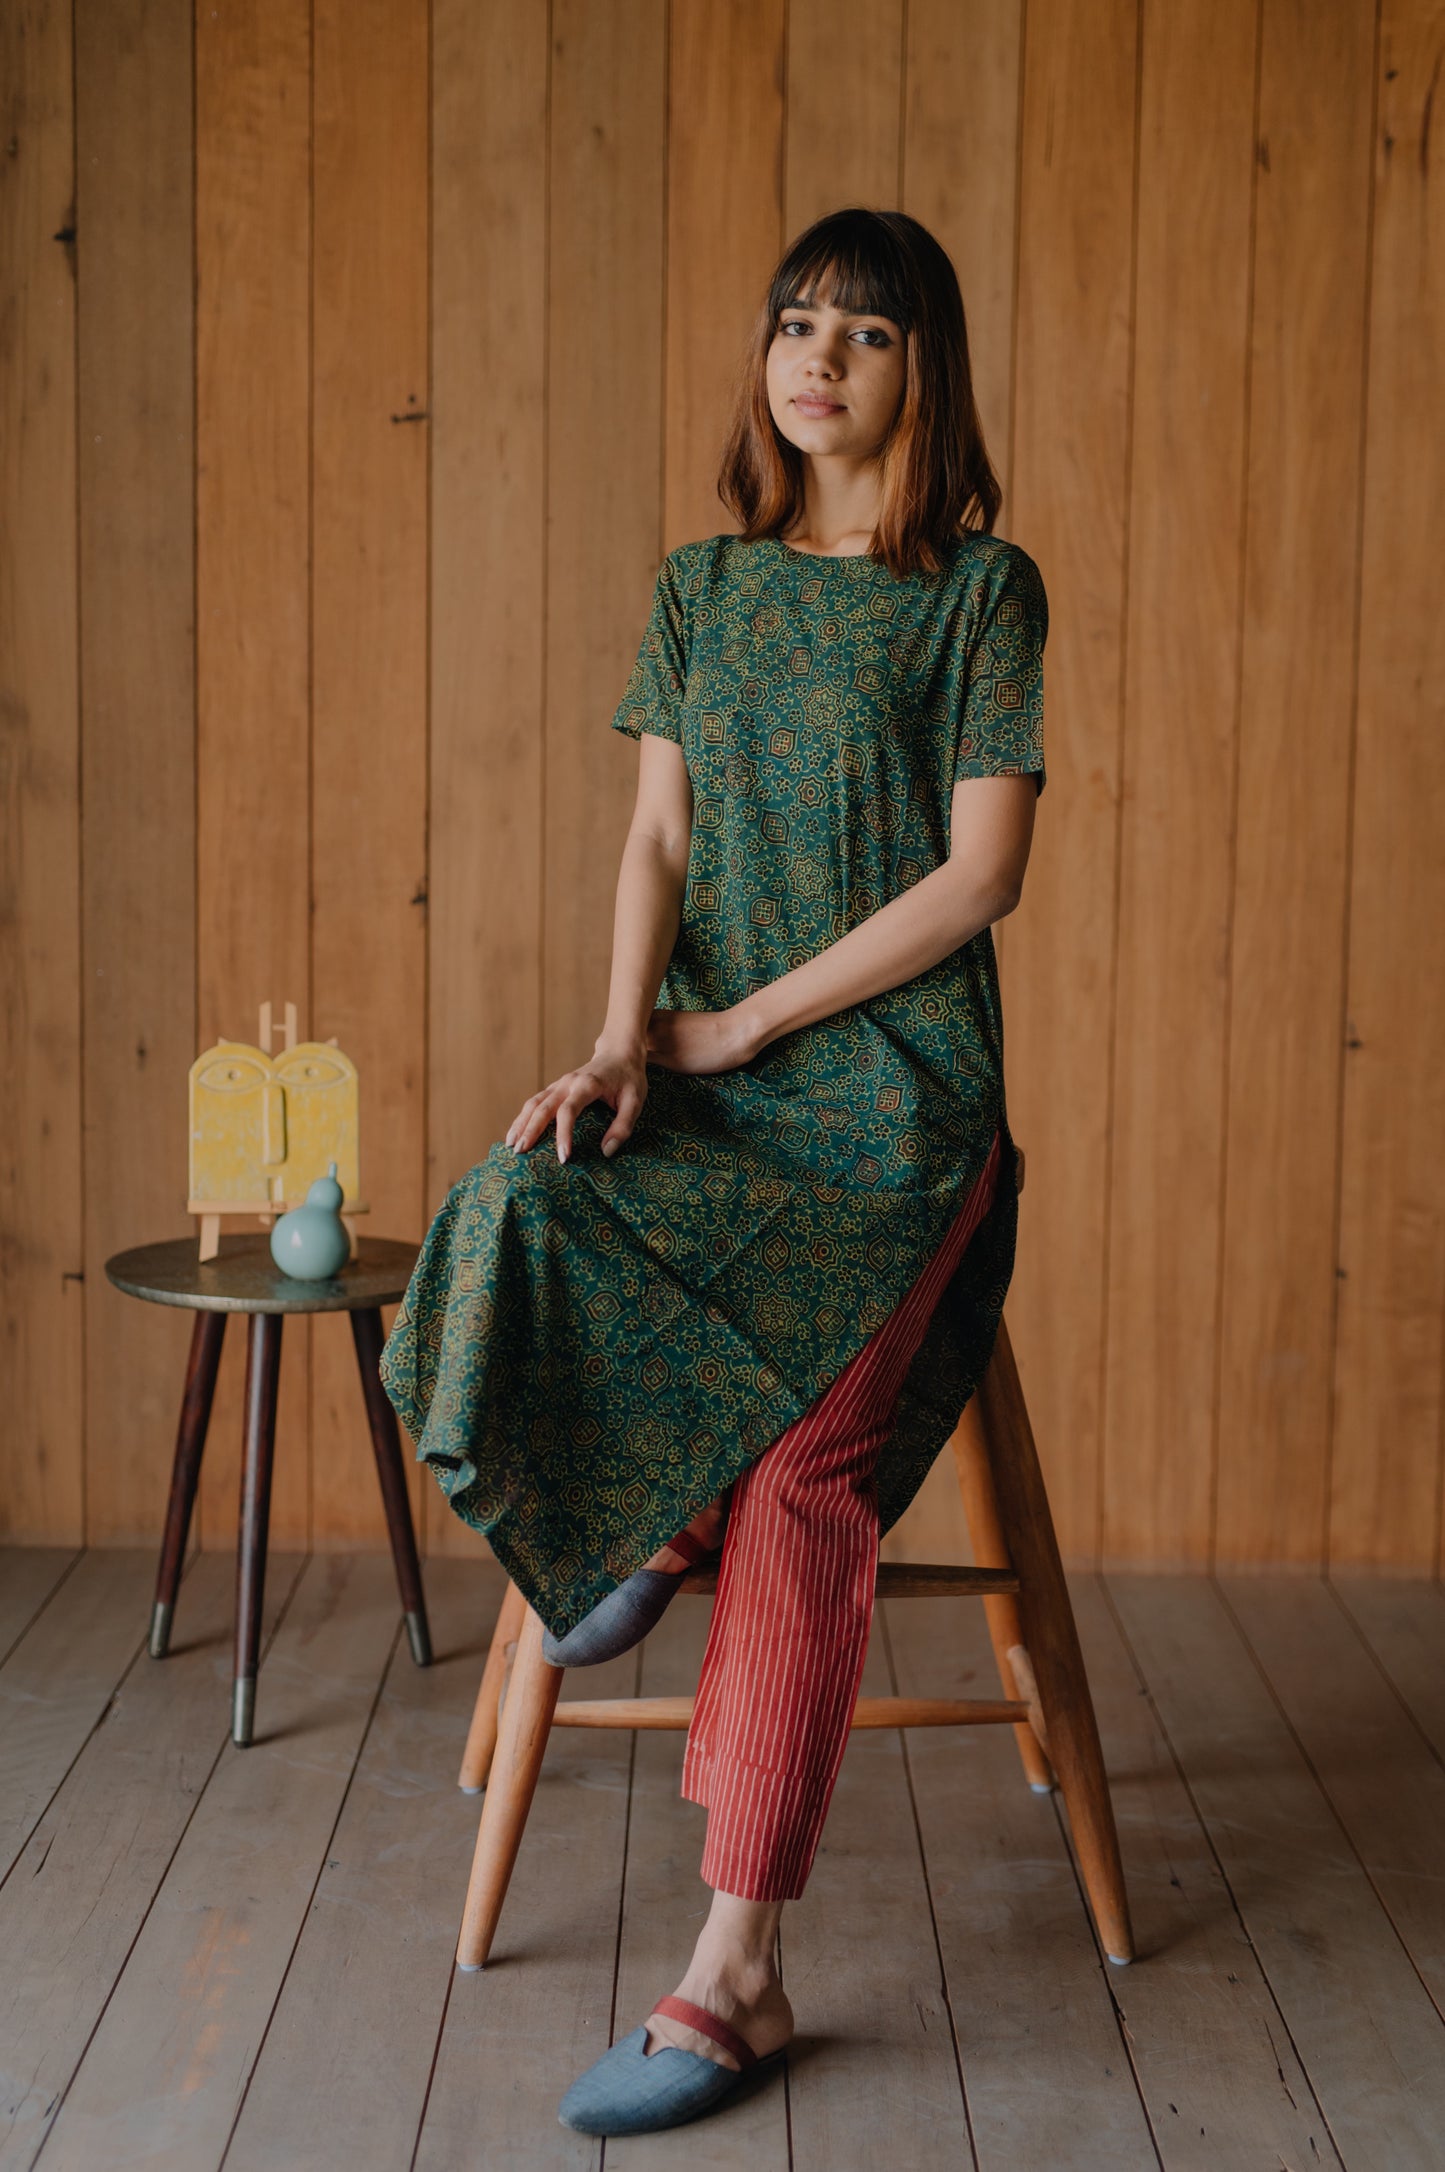 Step into style and comfort with our Natural Hues Pant Set. The Ajrakh hand block print on the green kurta perfectly complements the stripes madder dyed pants, delivering a unique and eye-catching look. The elasticated waistband and breathable fabric make this set perfect for everyday wear.